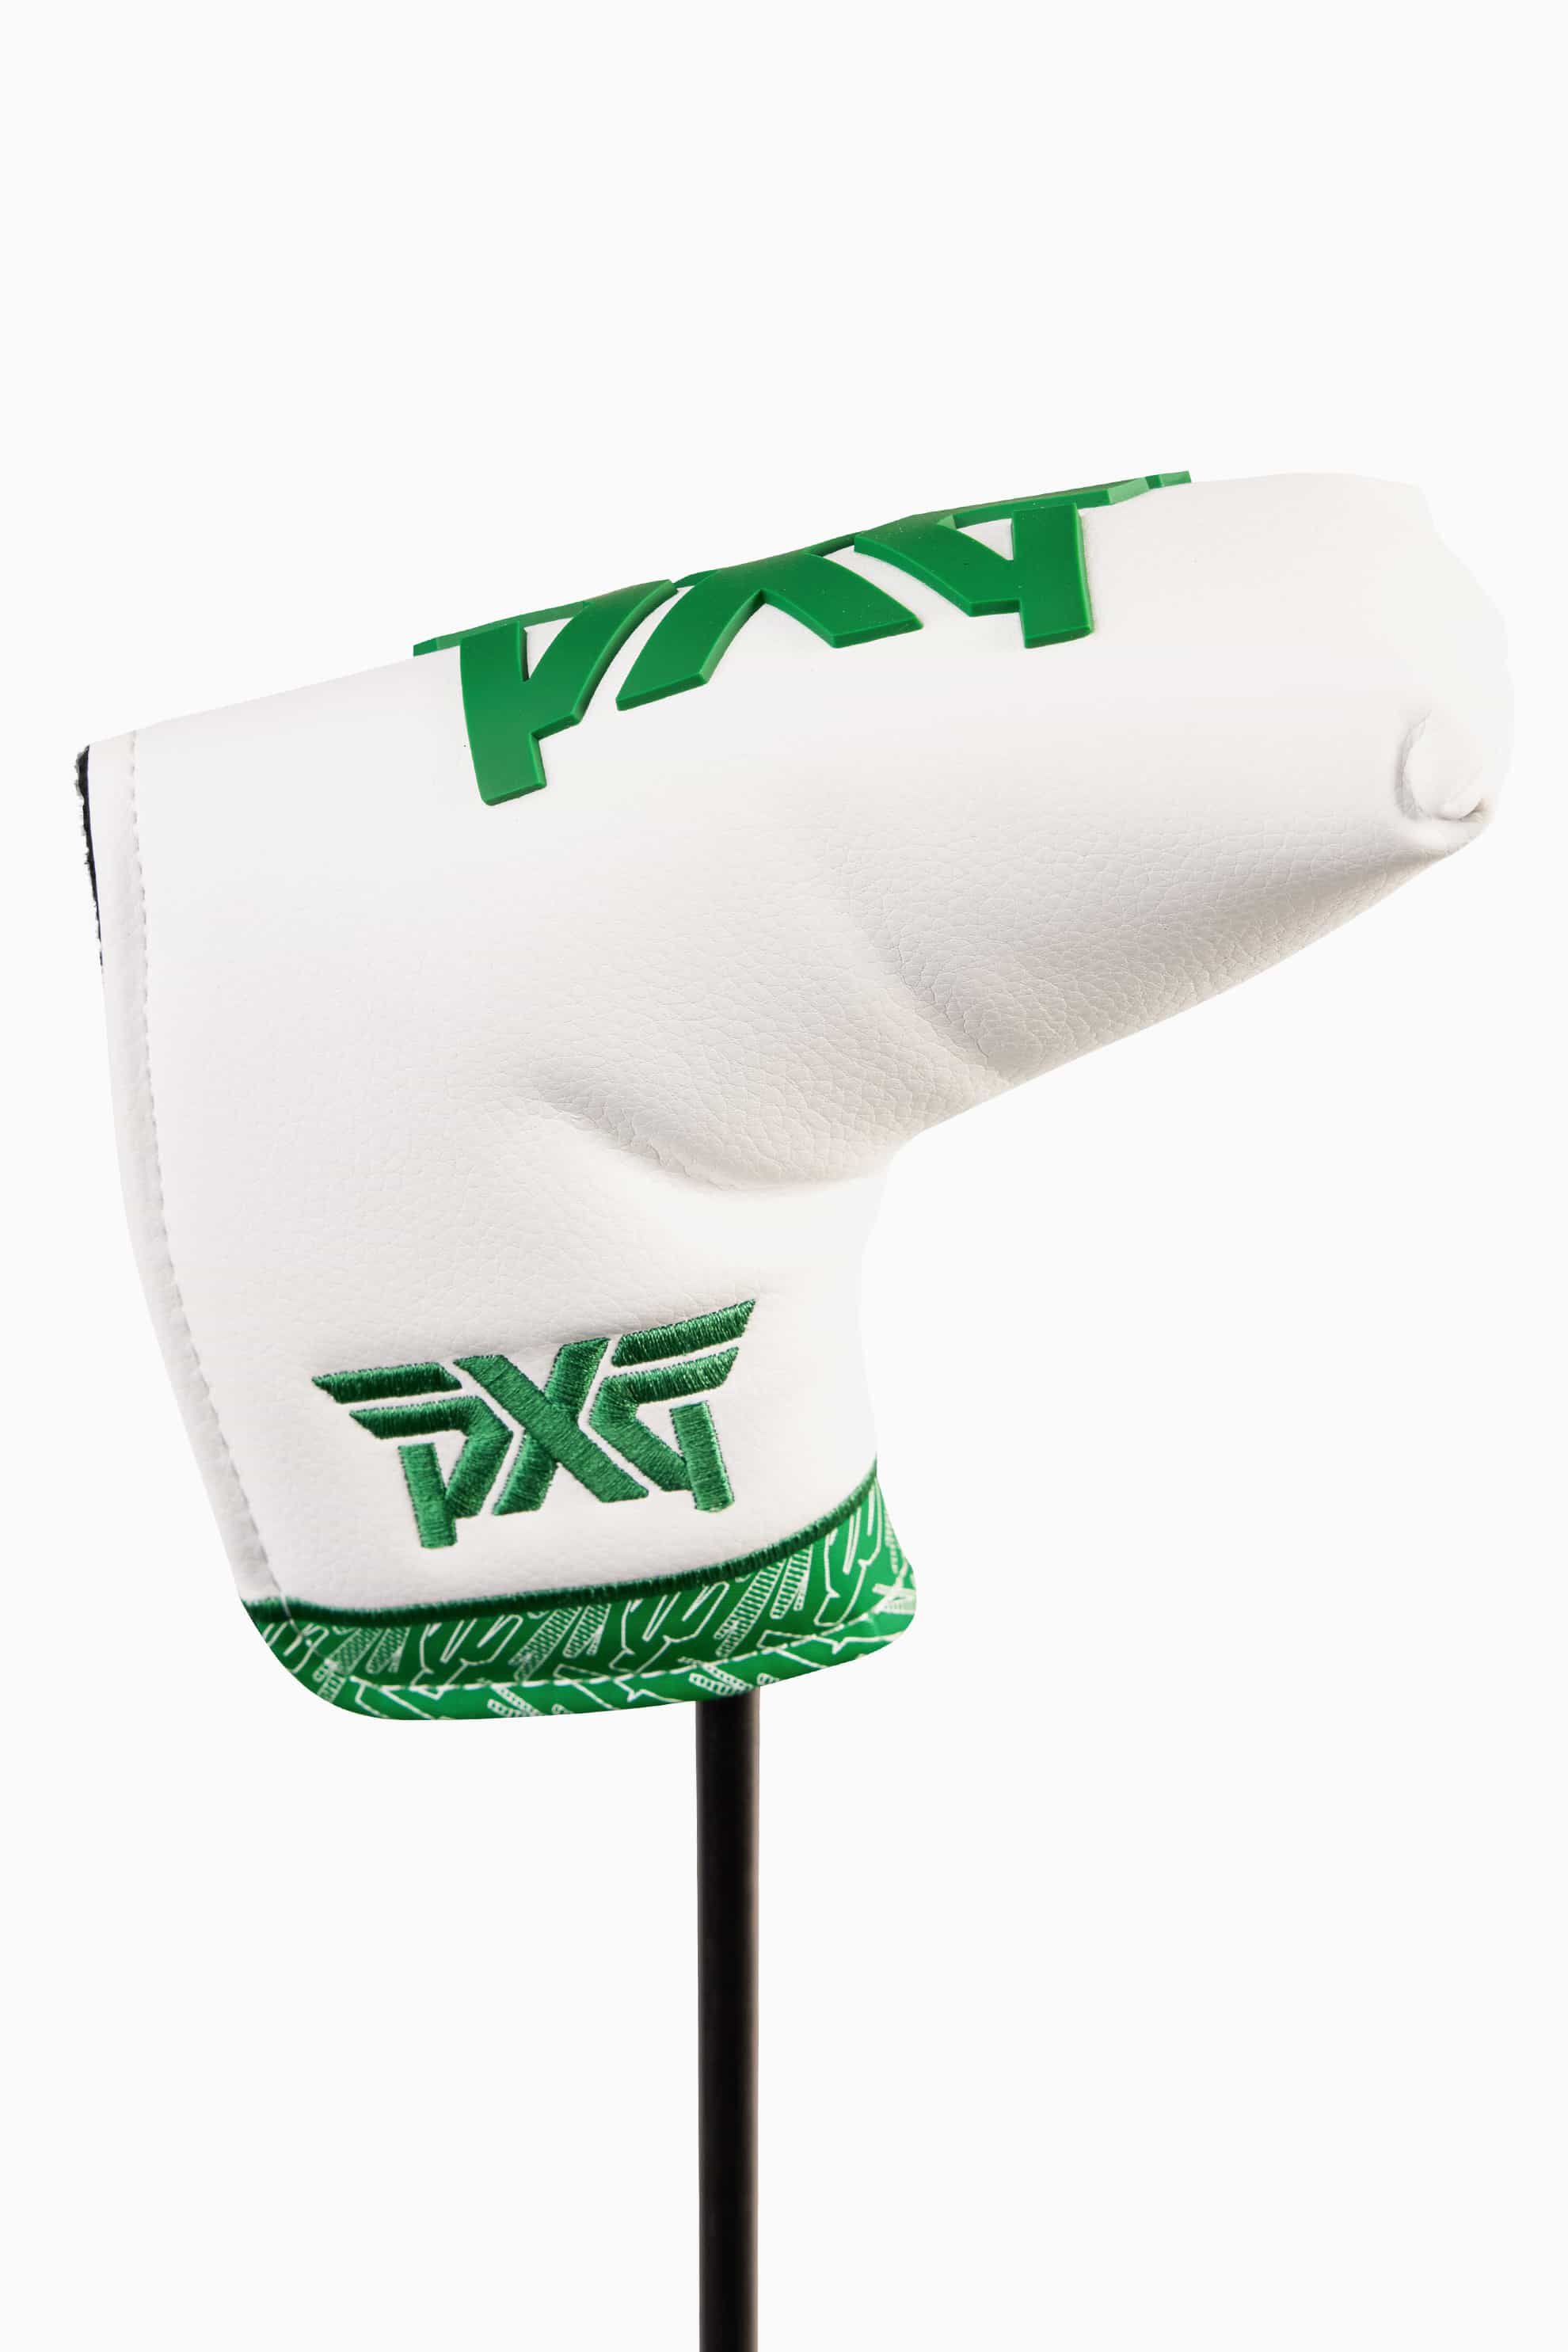 Shop PXG Headcovers for Driver, Woods, and Putter | PXG